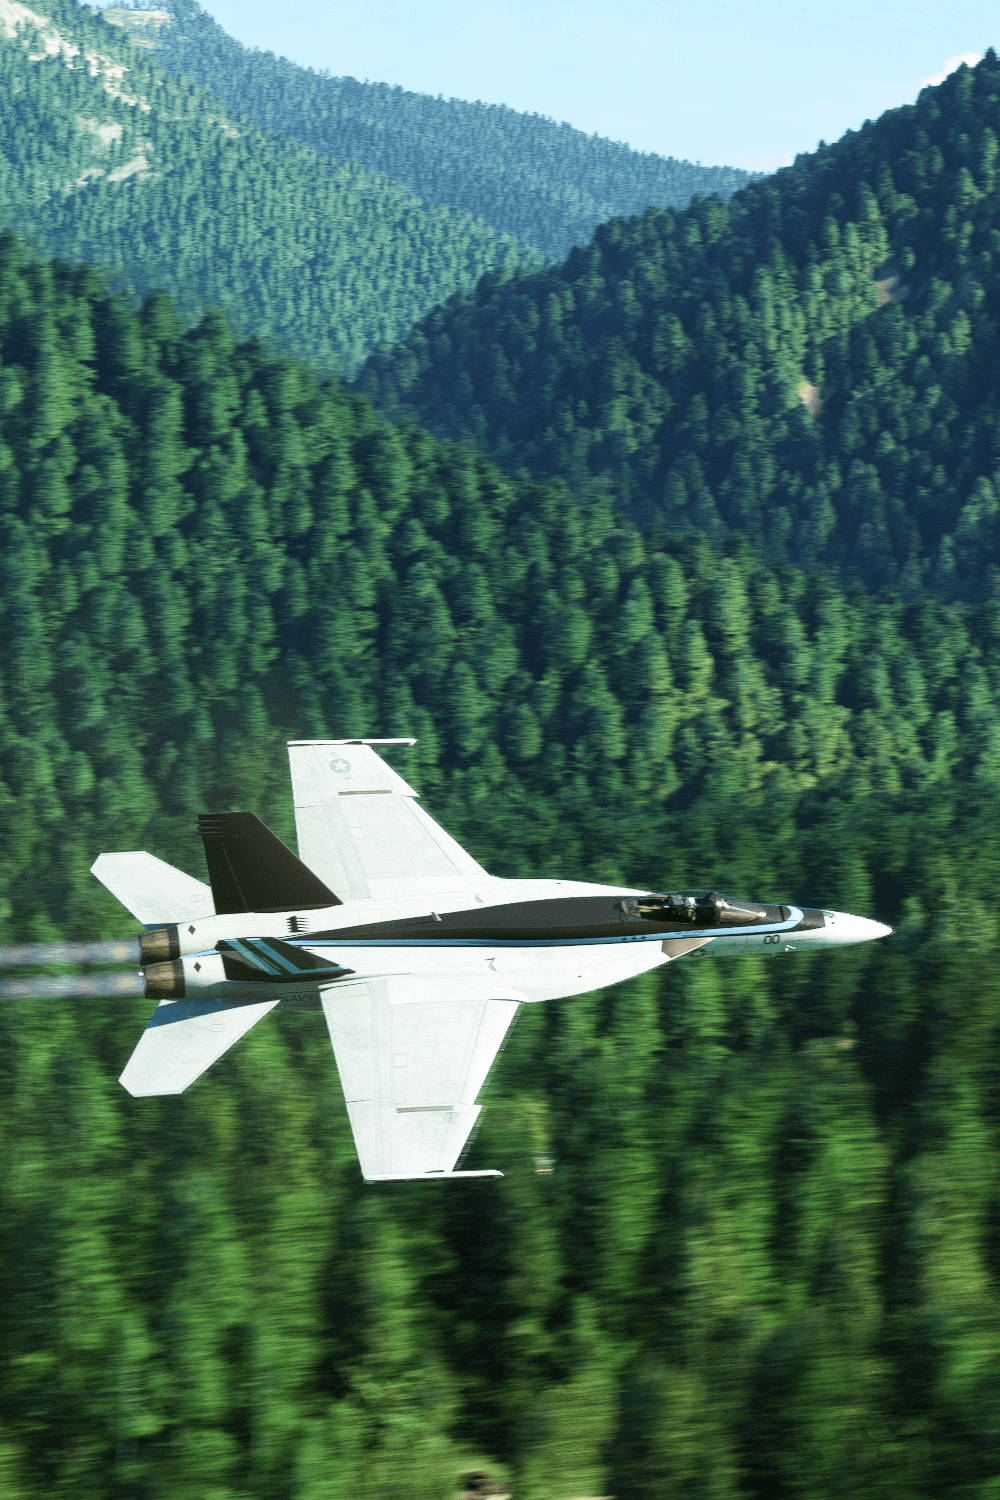 Taking to the Skies with Unmatched Performance: Nvidia RTX 4080 and Microsoft Flight Simulator